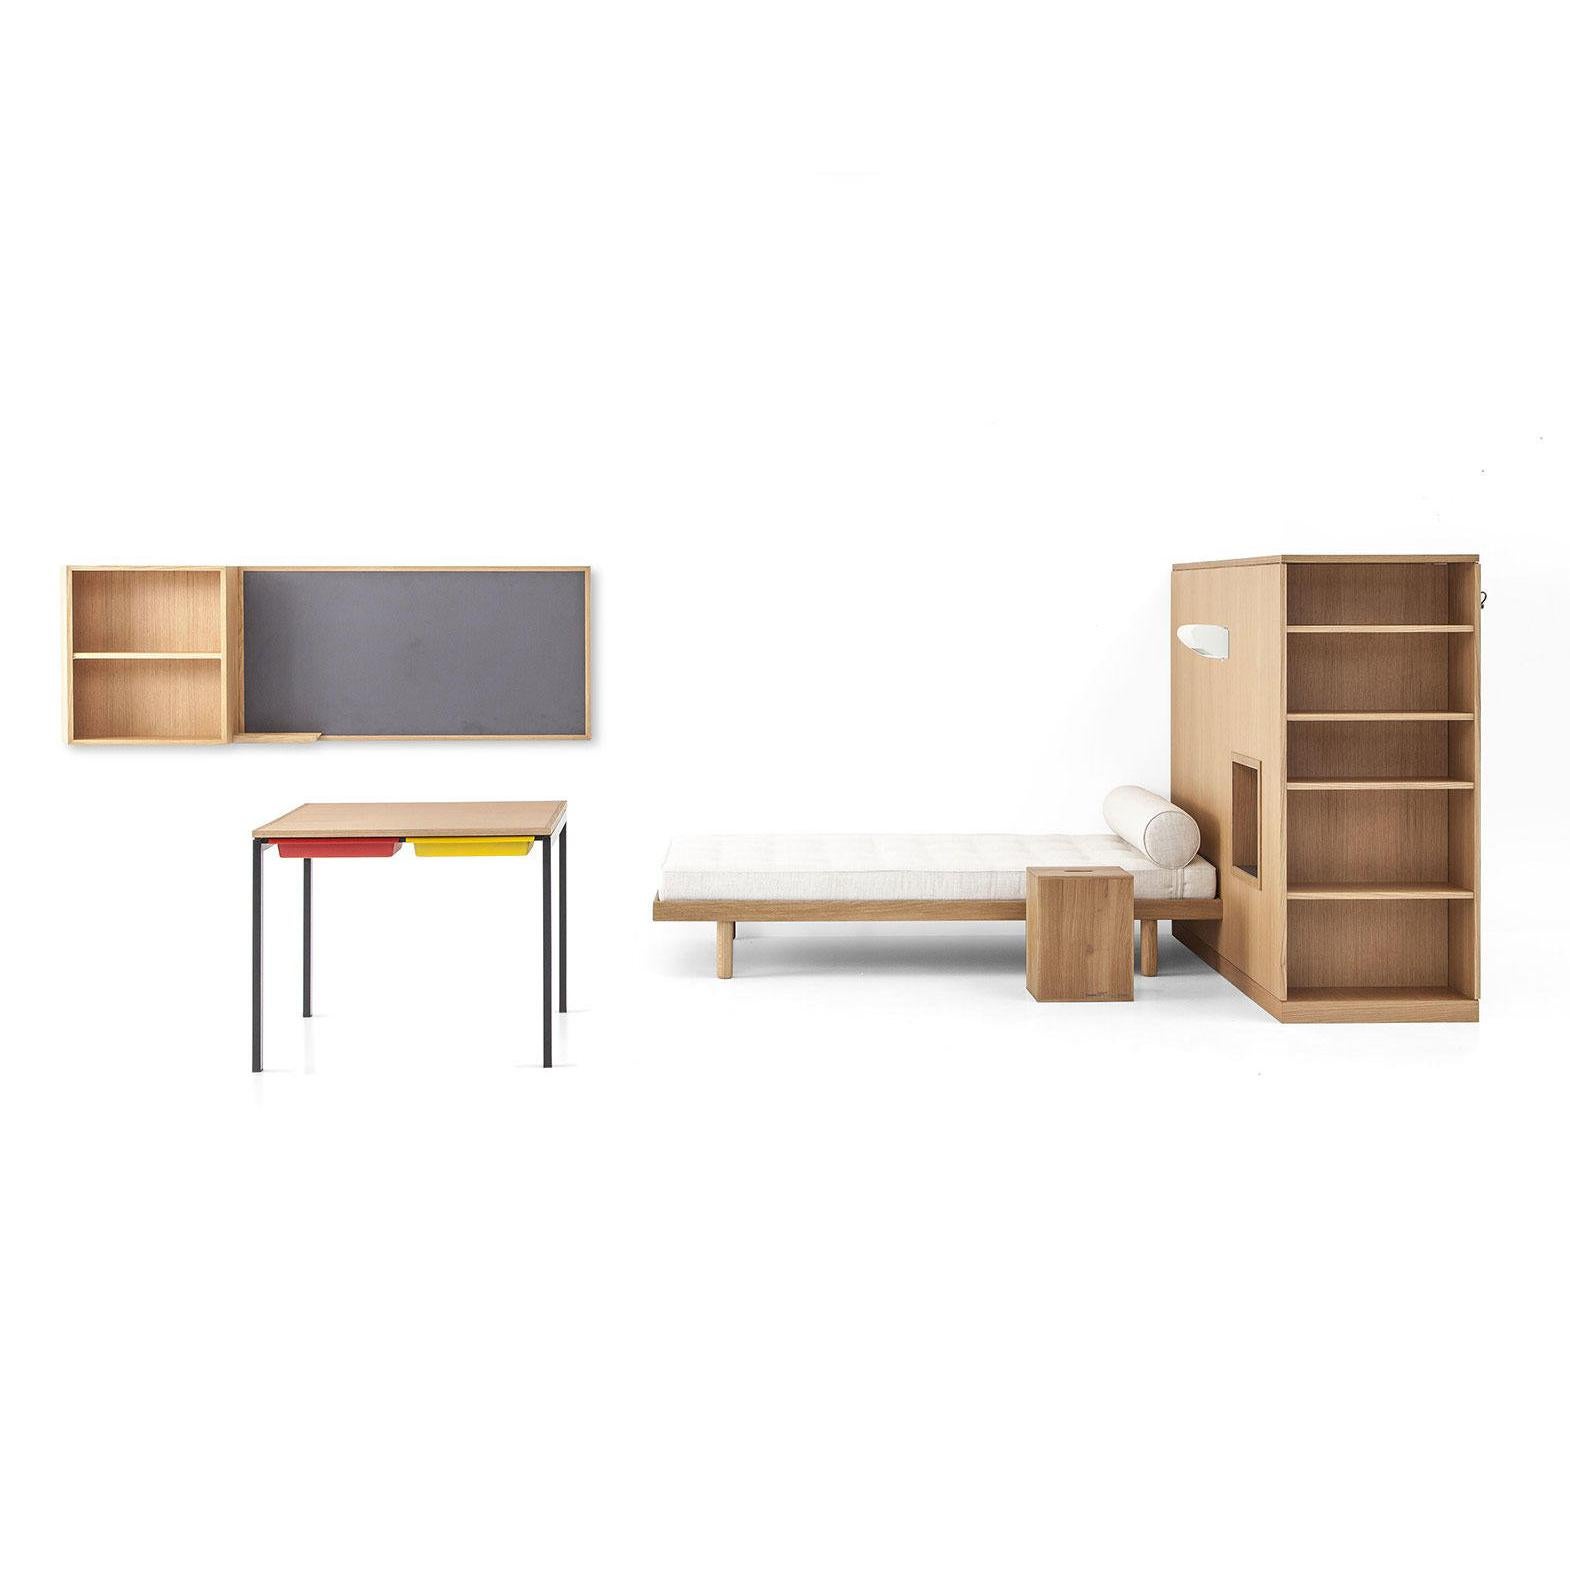 Reproduction of a student room in the Maison du Brésil, a set of a wardrobe-room divider, a bed, a desk, the Maison du Bresil stool and a wall-hung bookcase and blackboard. Set designed by Le Corbusier and Charlotte Perriand in 1959. Relaunched in